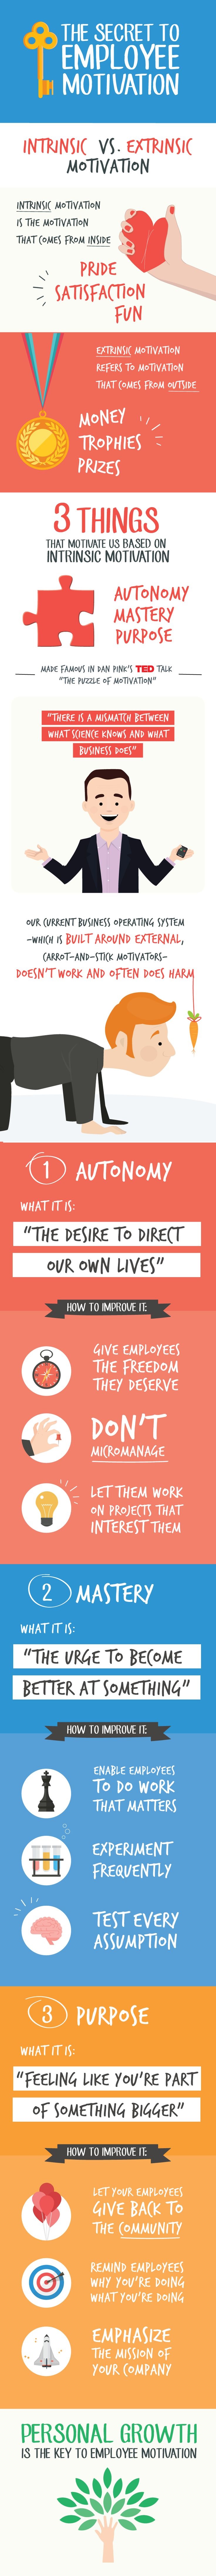 These Are The Best Ways To Inspire Employee Motivation 